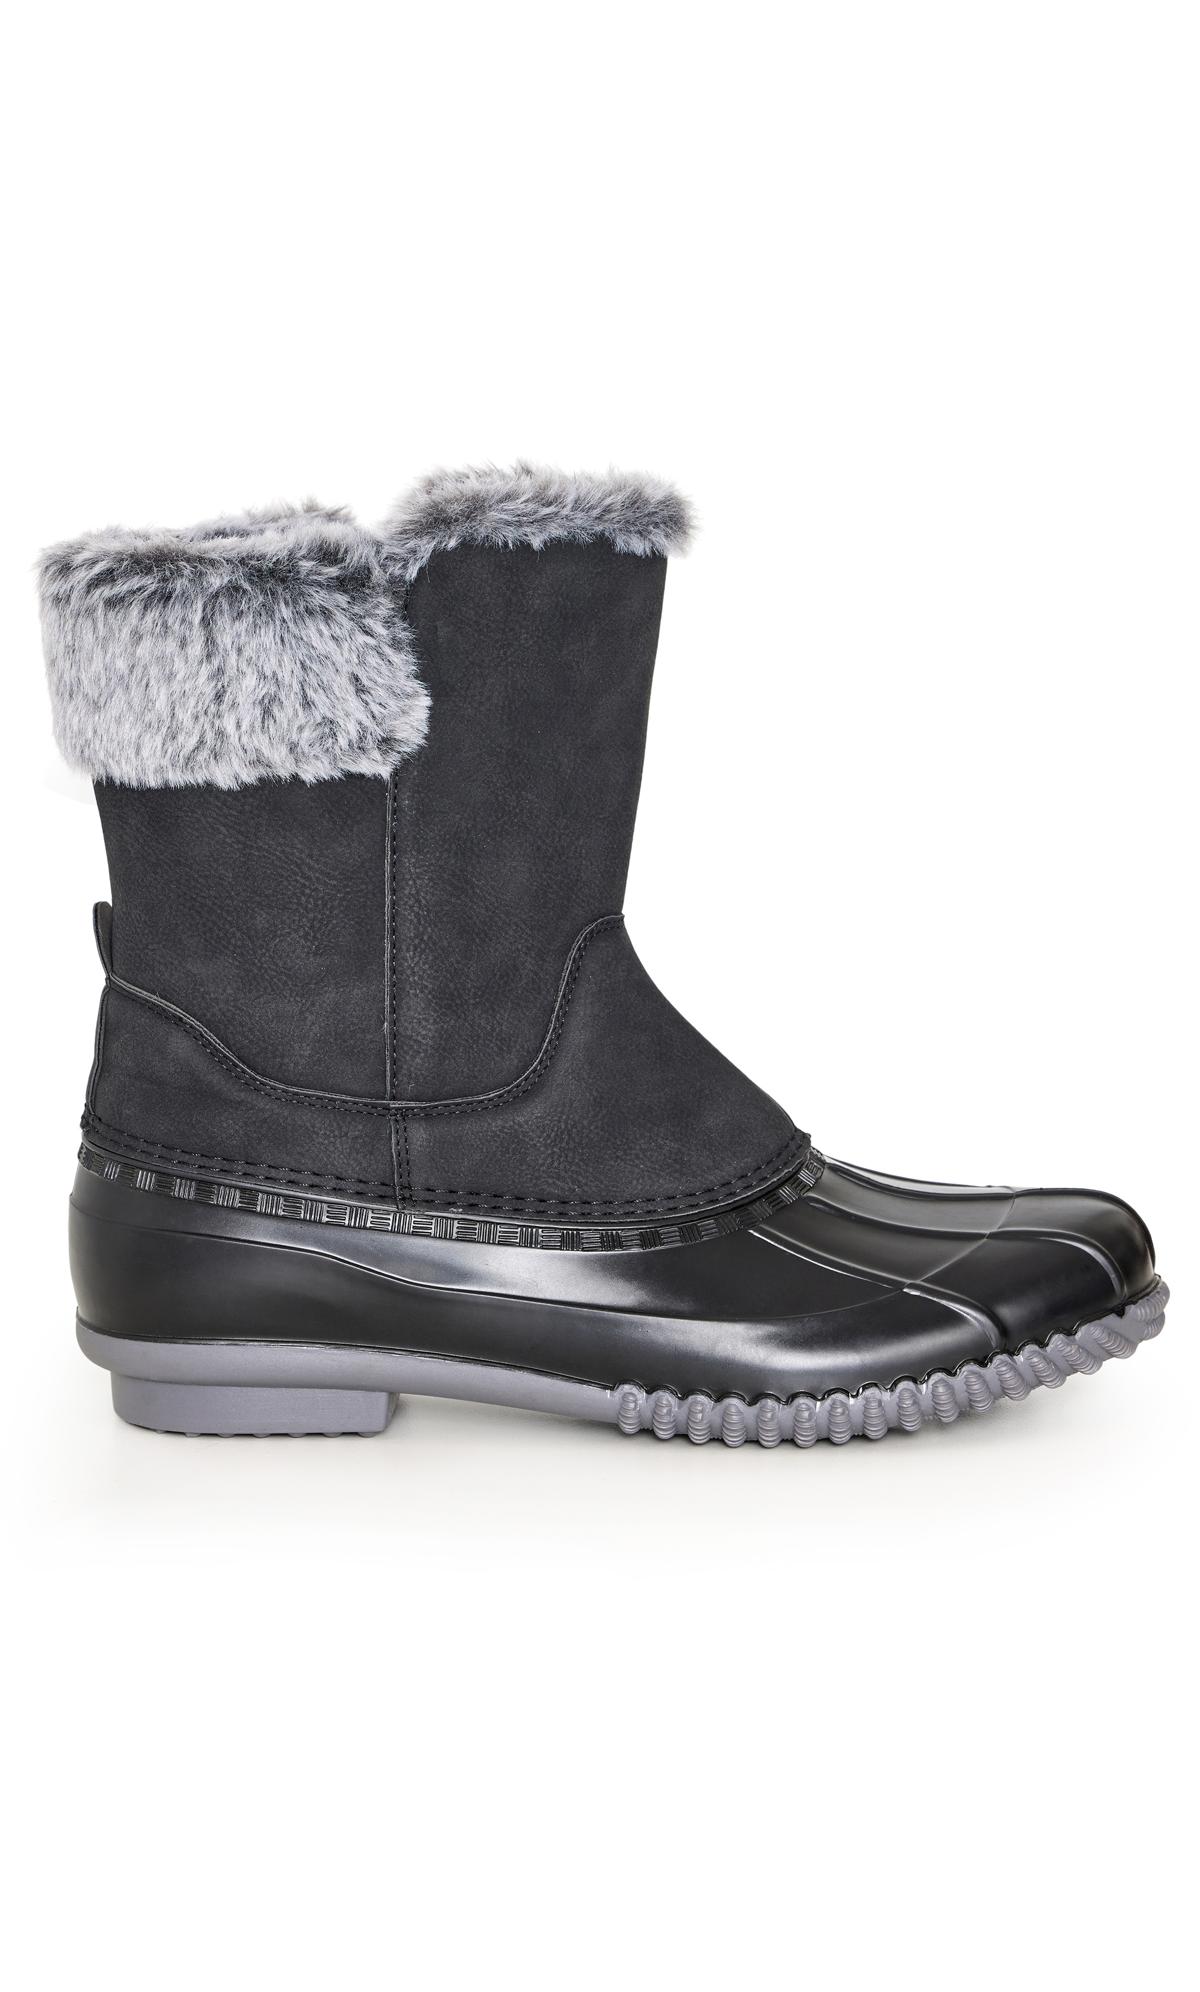 Evans WIDE FIT Black Faux Fur Lined Embroided Snow Boots 2